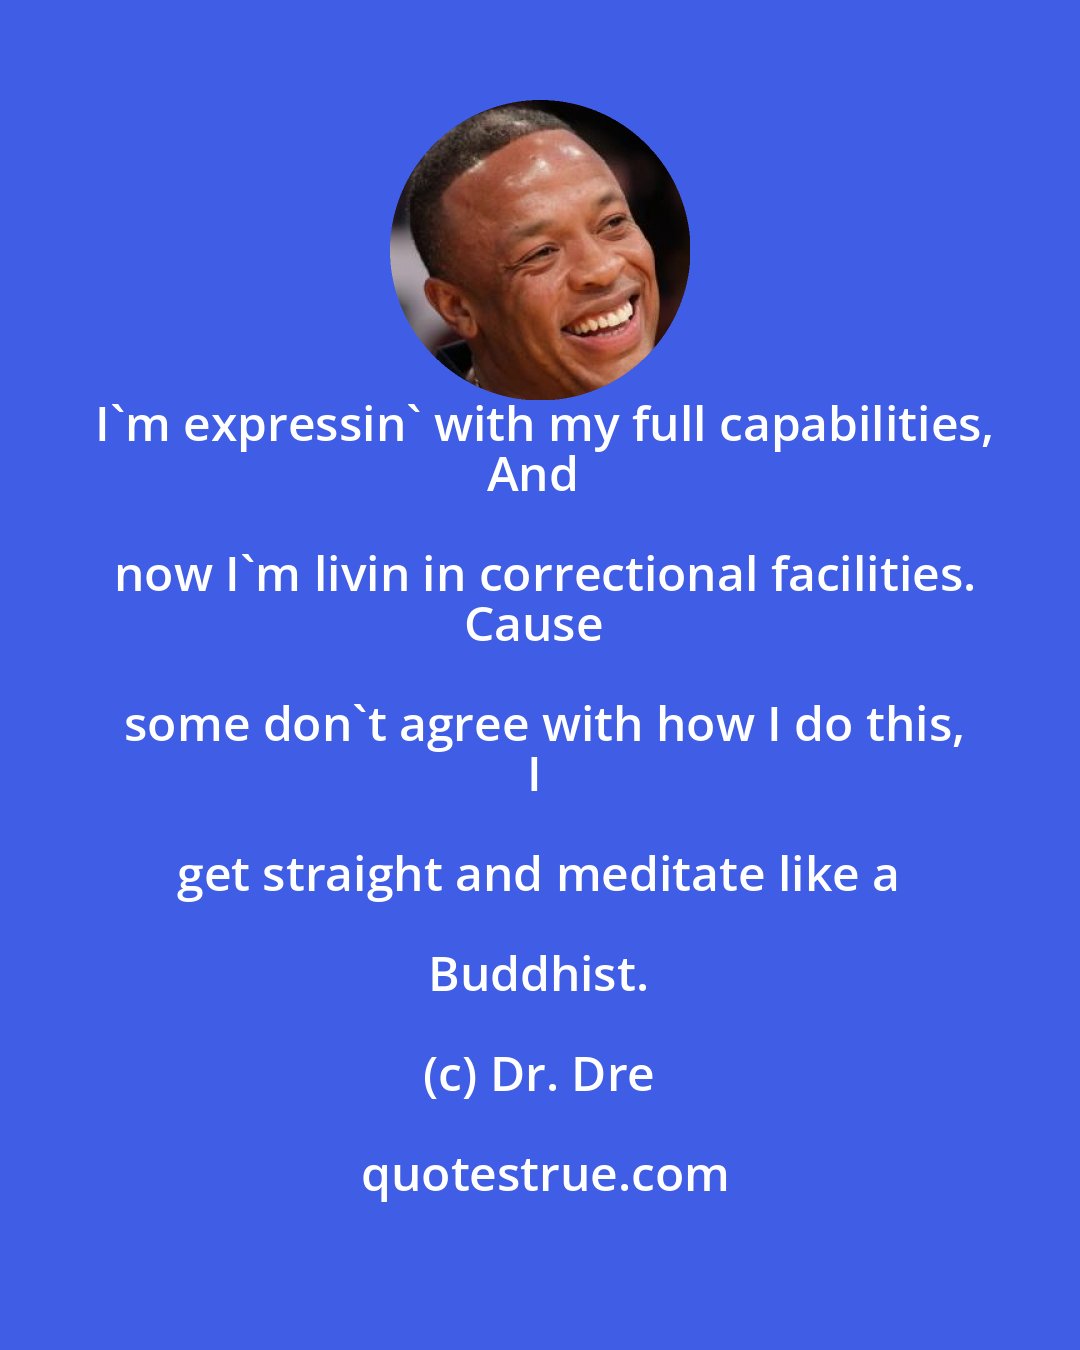 Dr. Dre: I'm expressin' with my full capabilities,
And now I'm livin in correctional facilities.
Cause some don't agree with how I do this,
I get straight and meditate like a Buddhist.